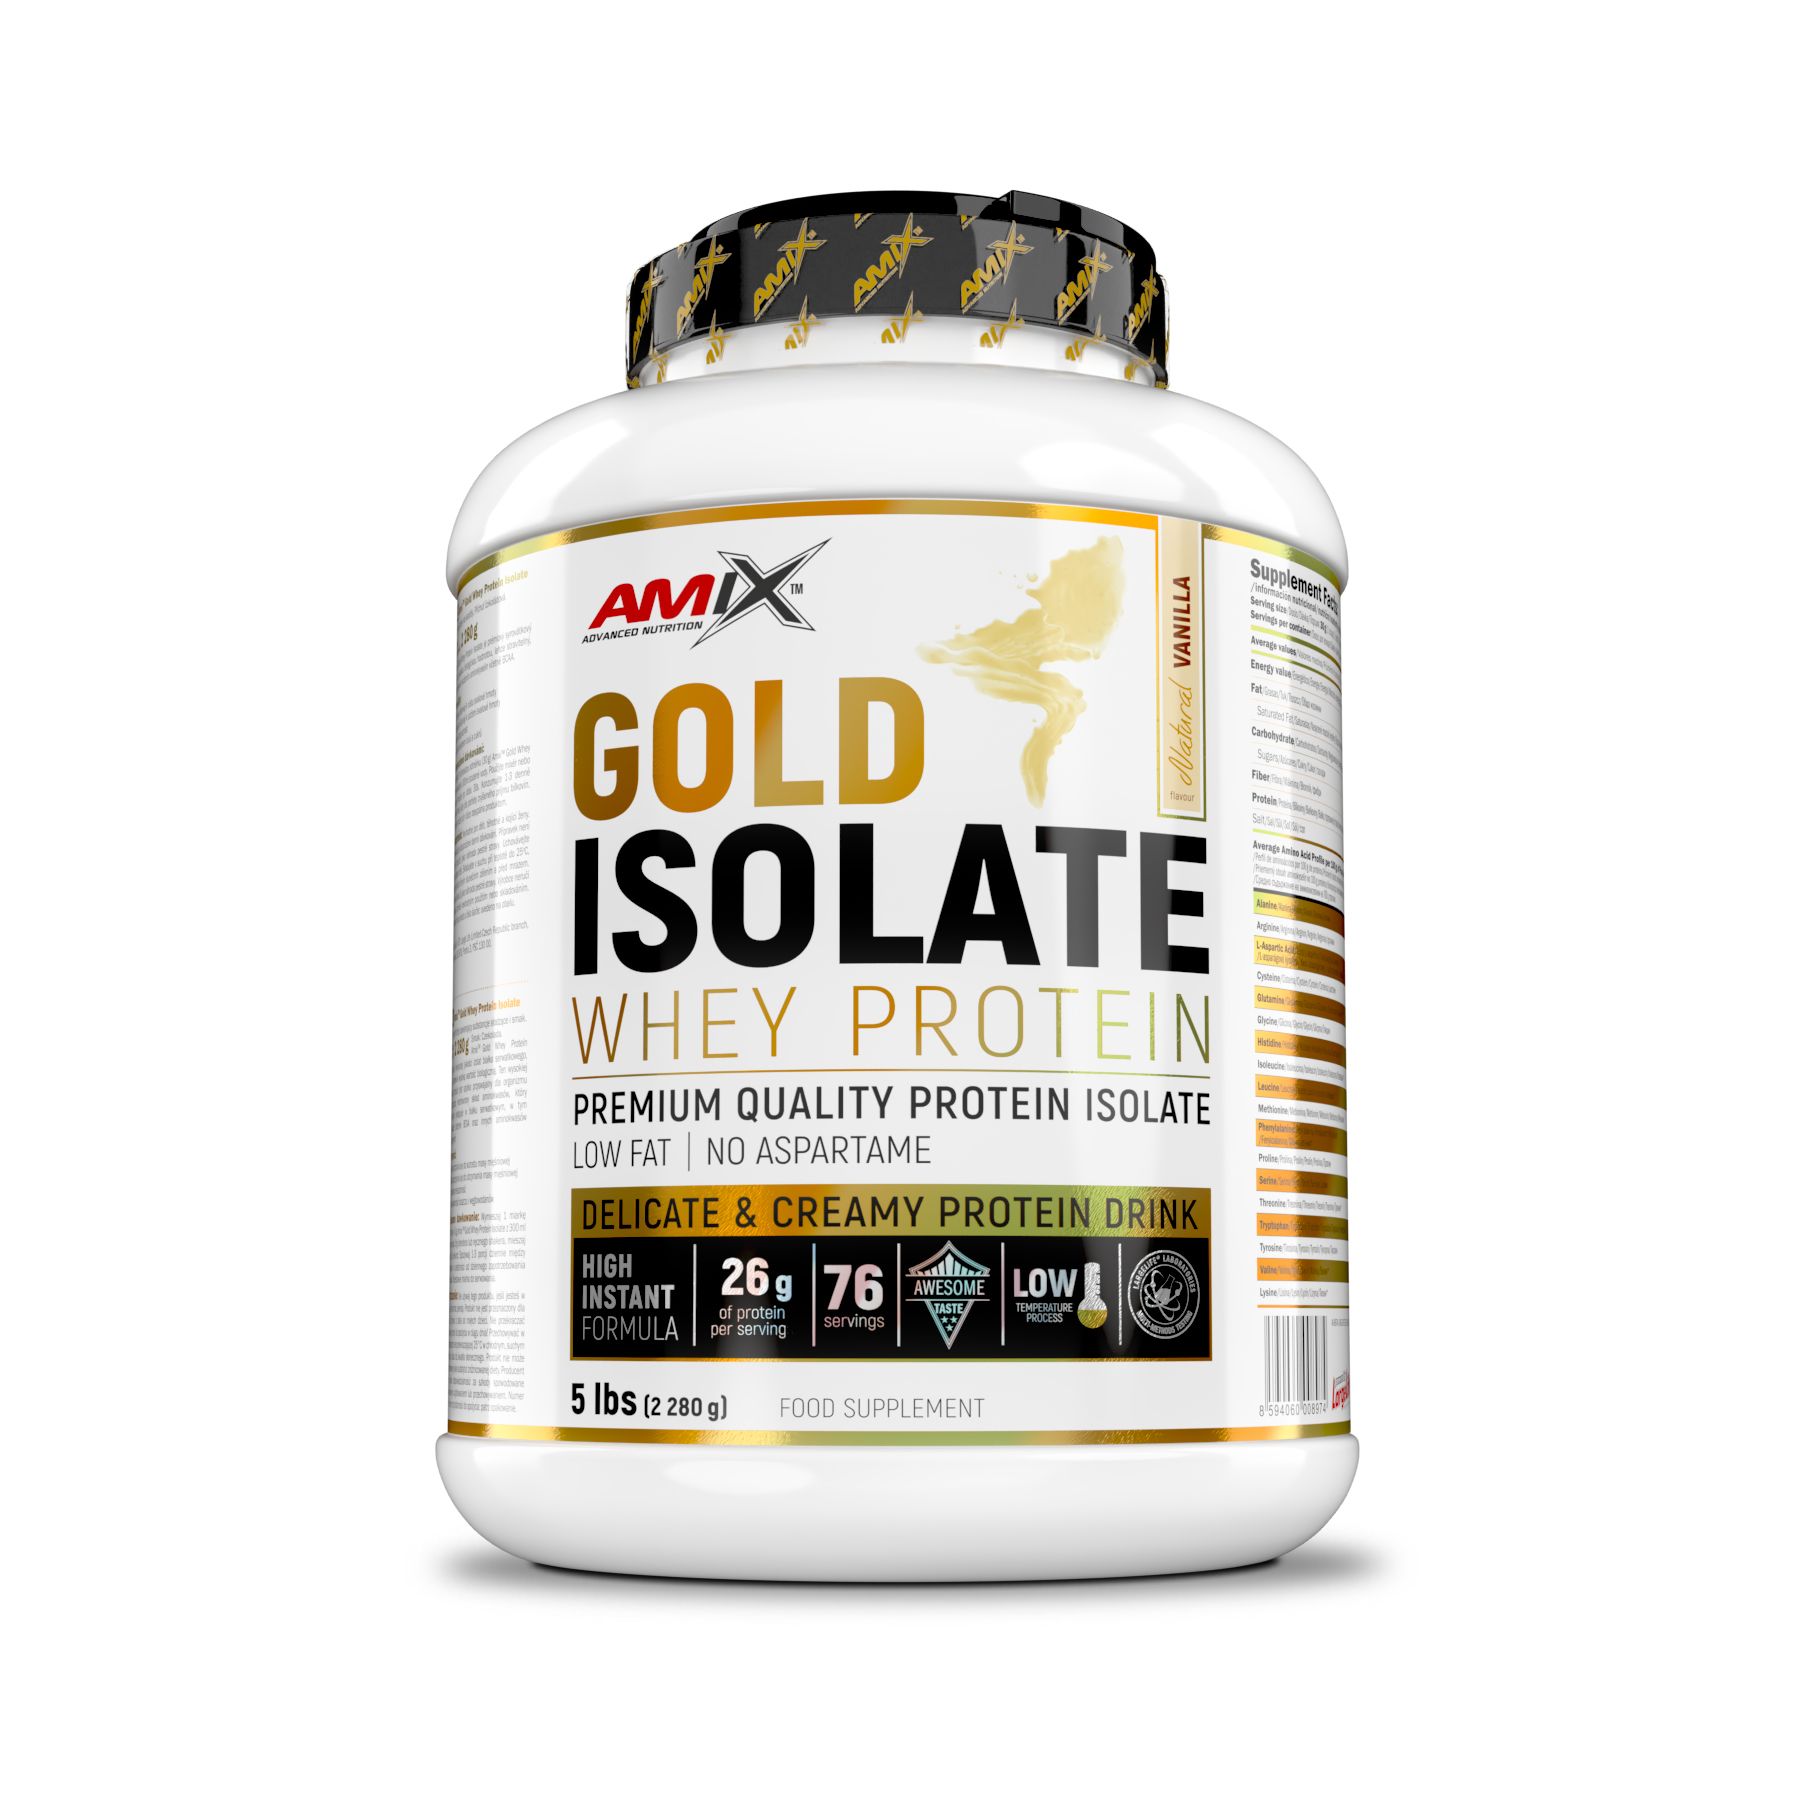 Amix Gold Whey Protein Isolate - 2280g - Natural Vanilla